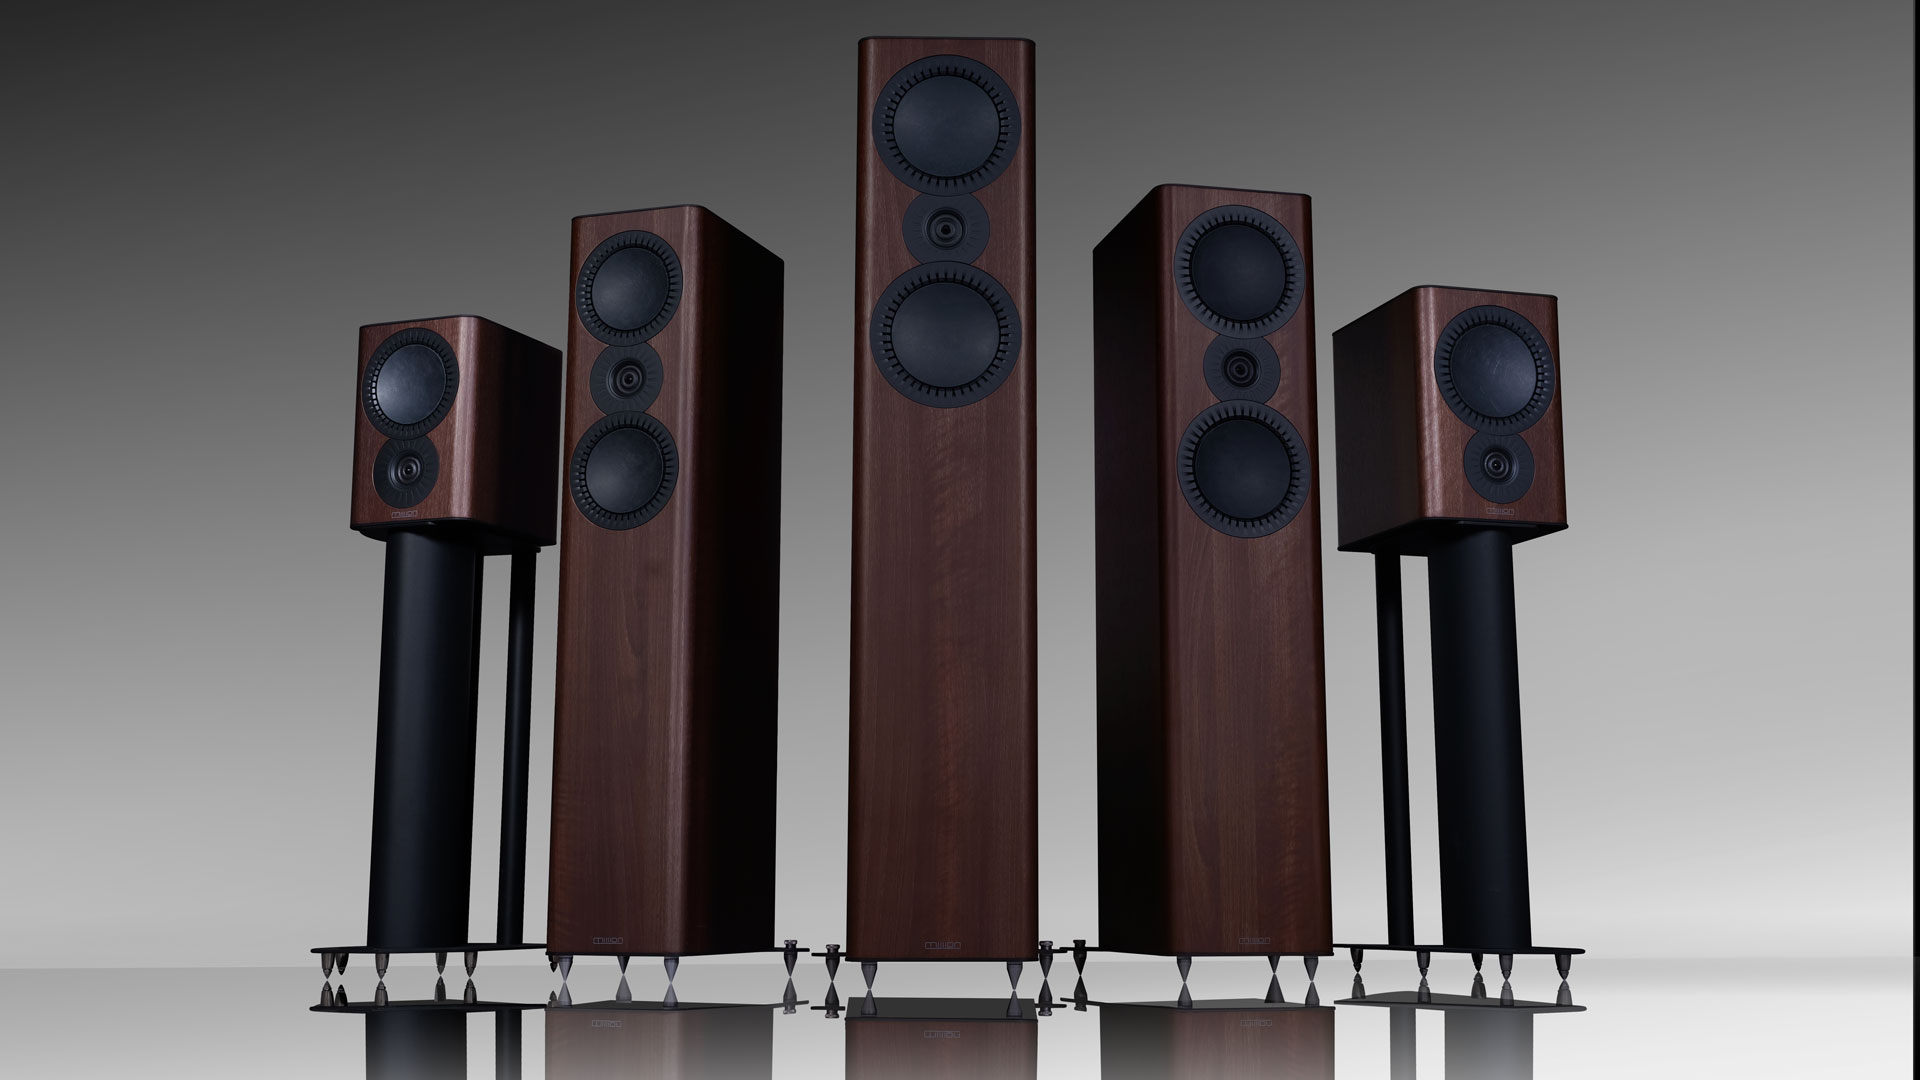 Various Speakers from the new QX MKII series by Mission (Image Credit: Mission)